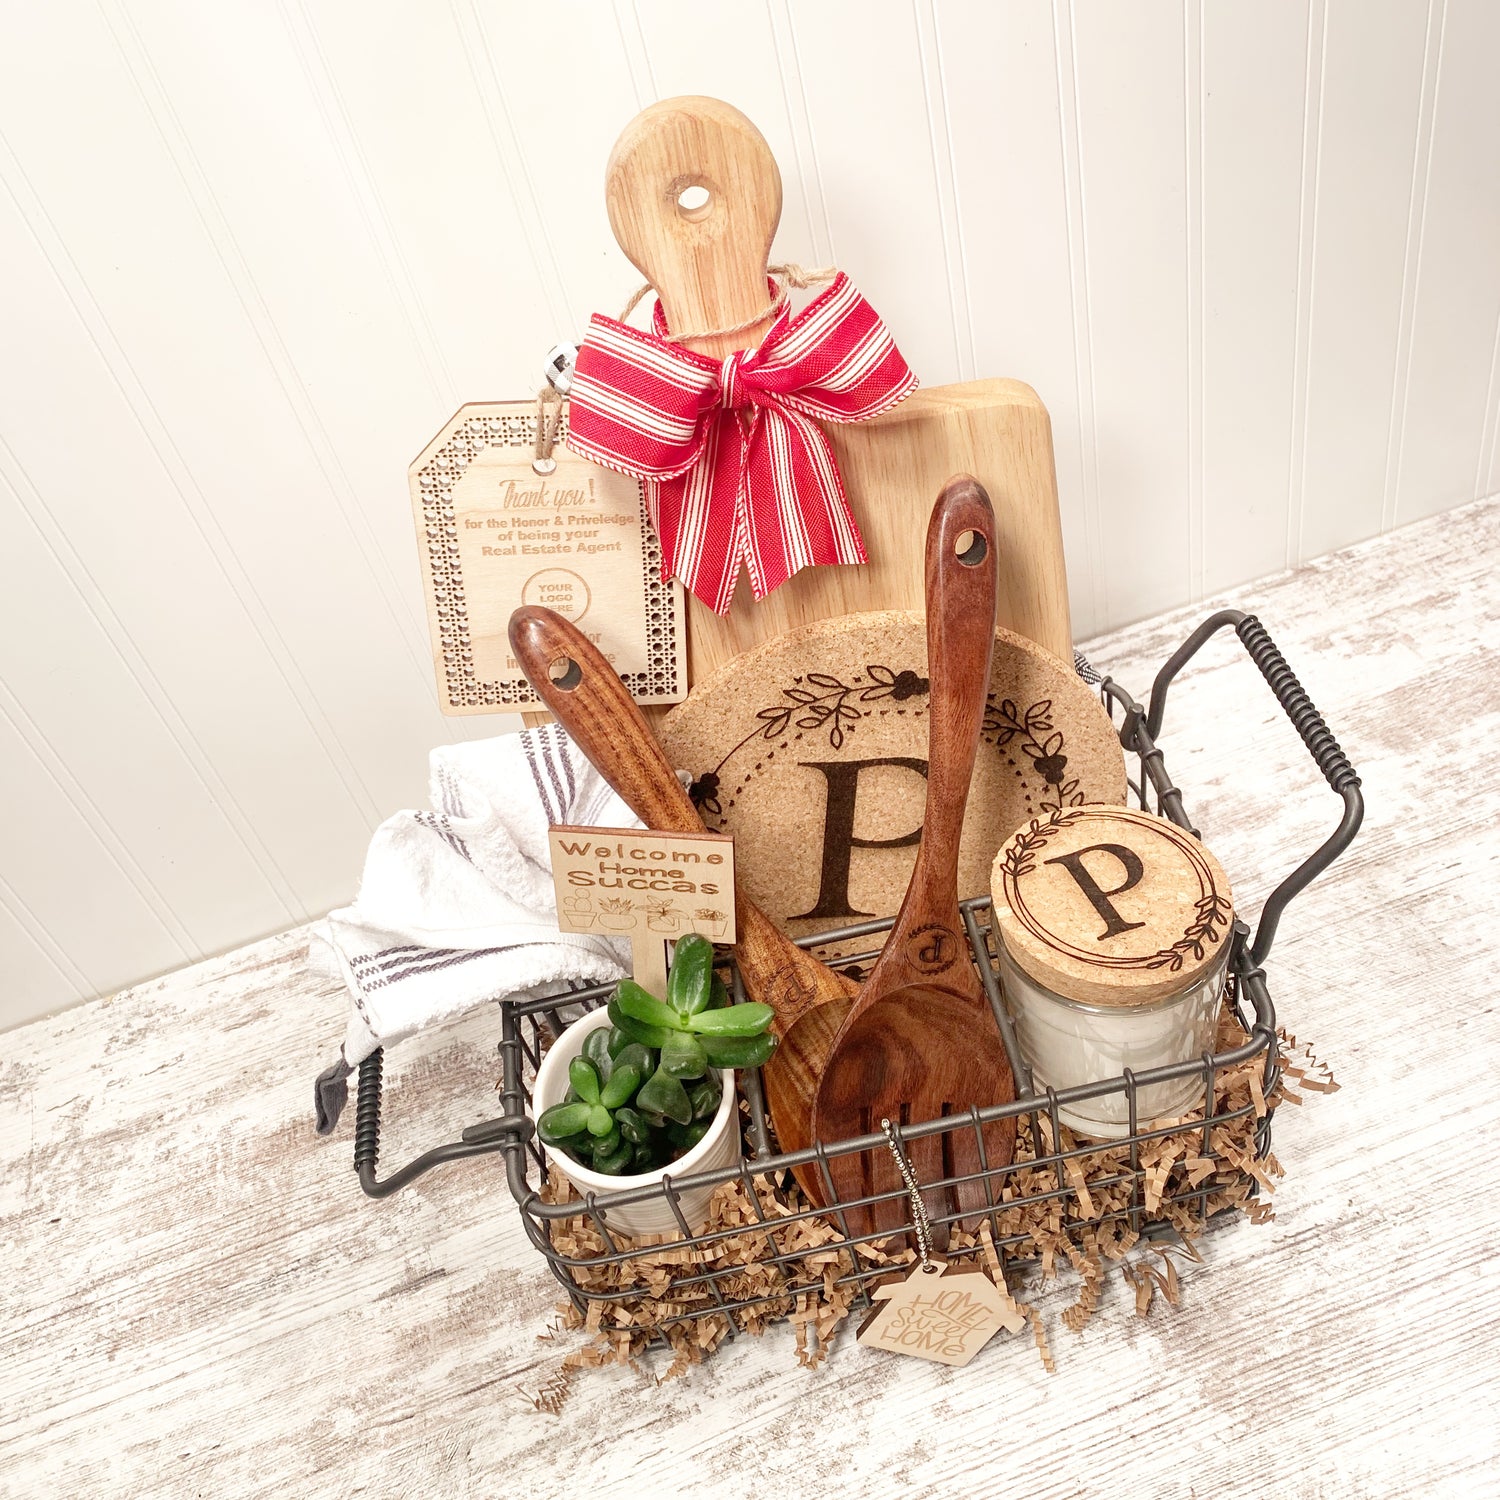 Welcome to Your New Home Gift Basket